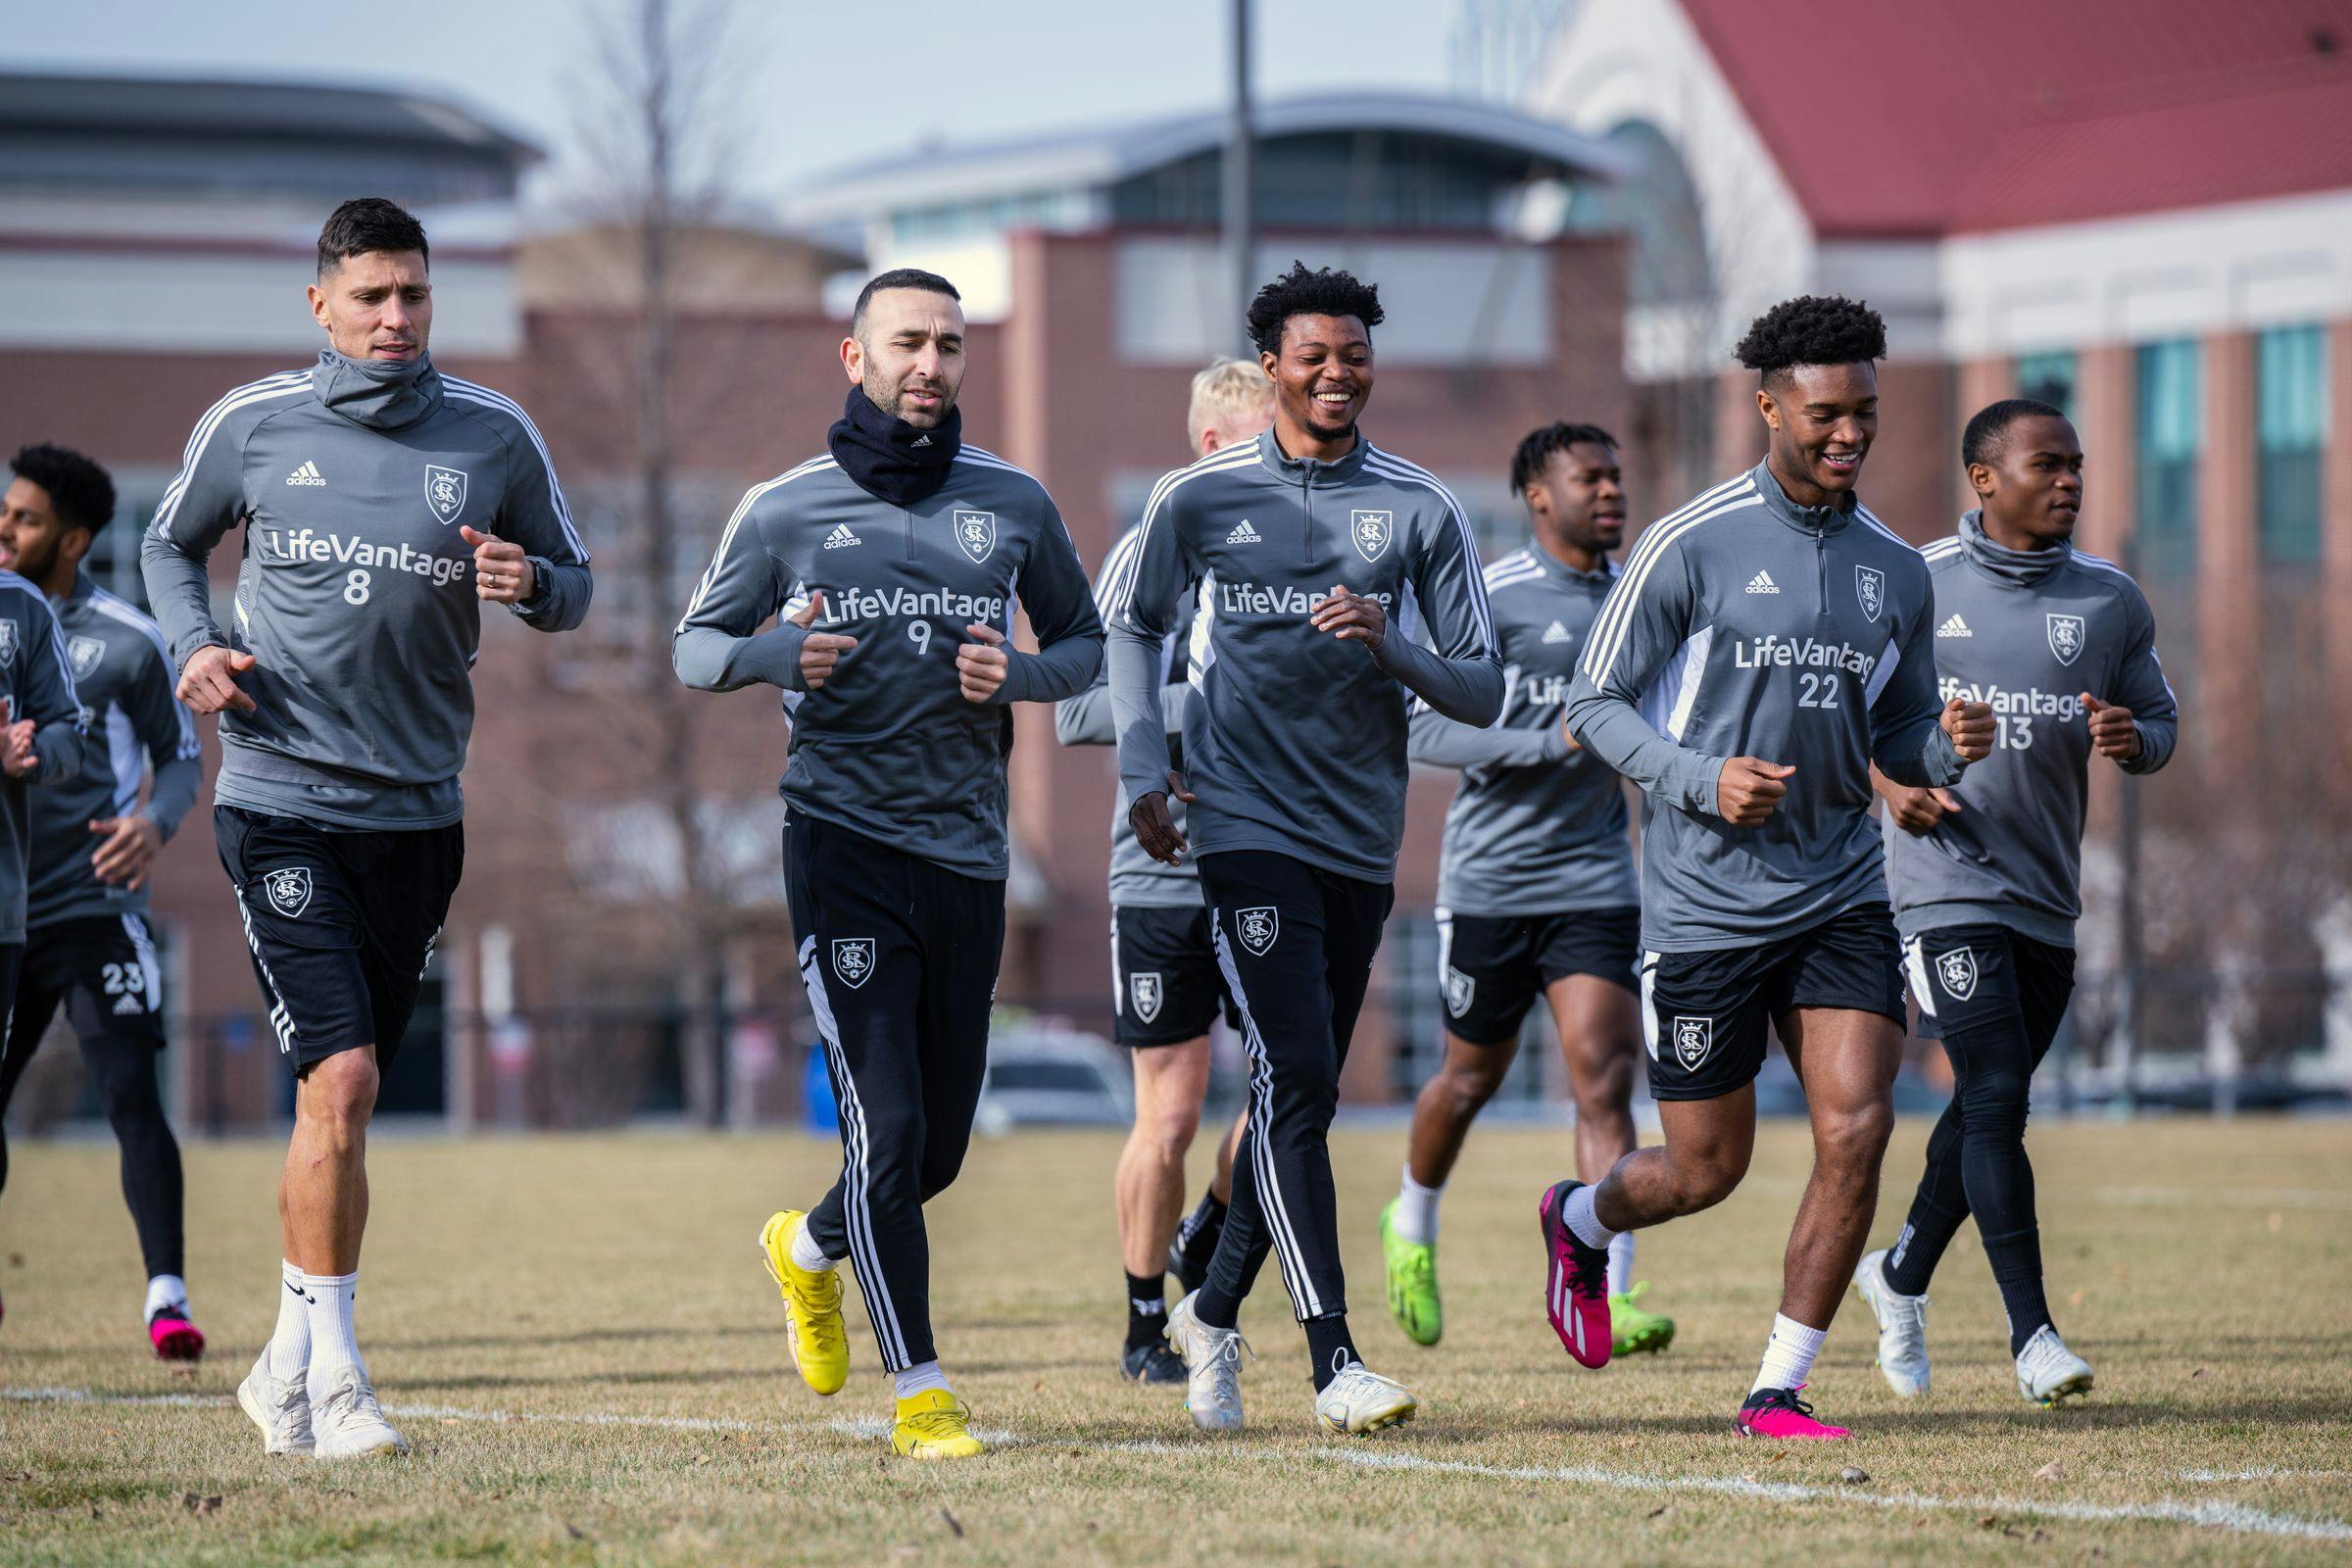 RSL looks to strengthen squad through fitness returns, young additions